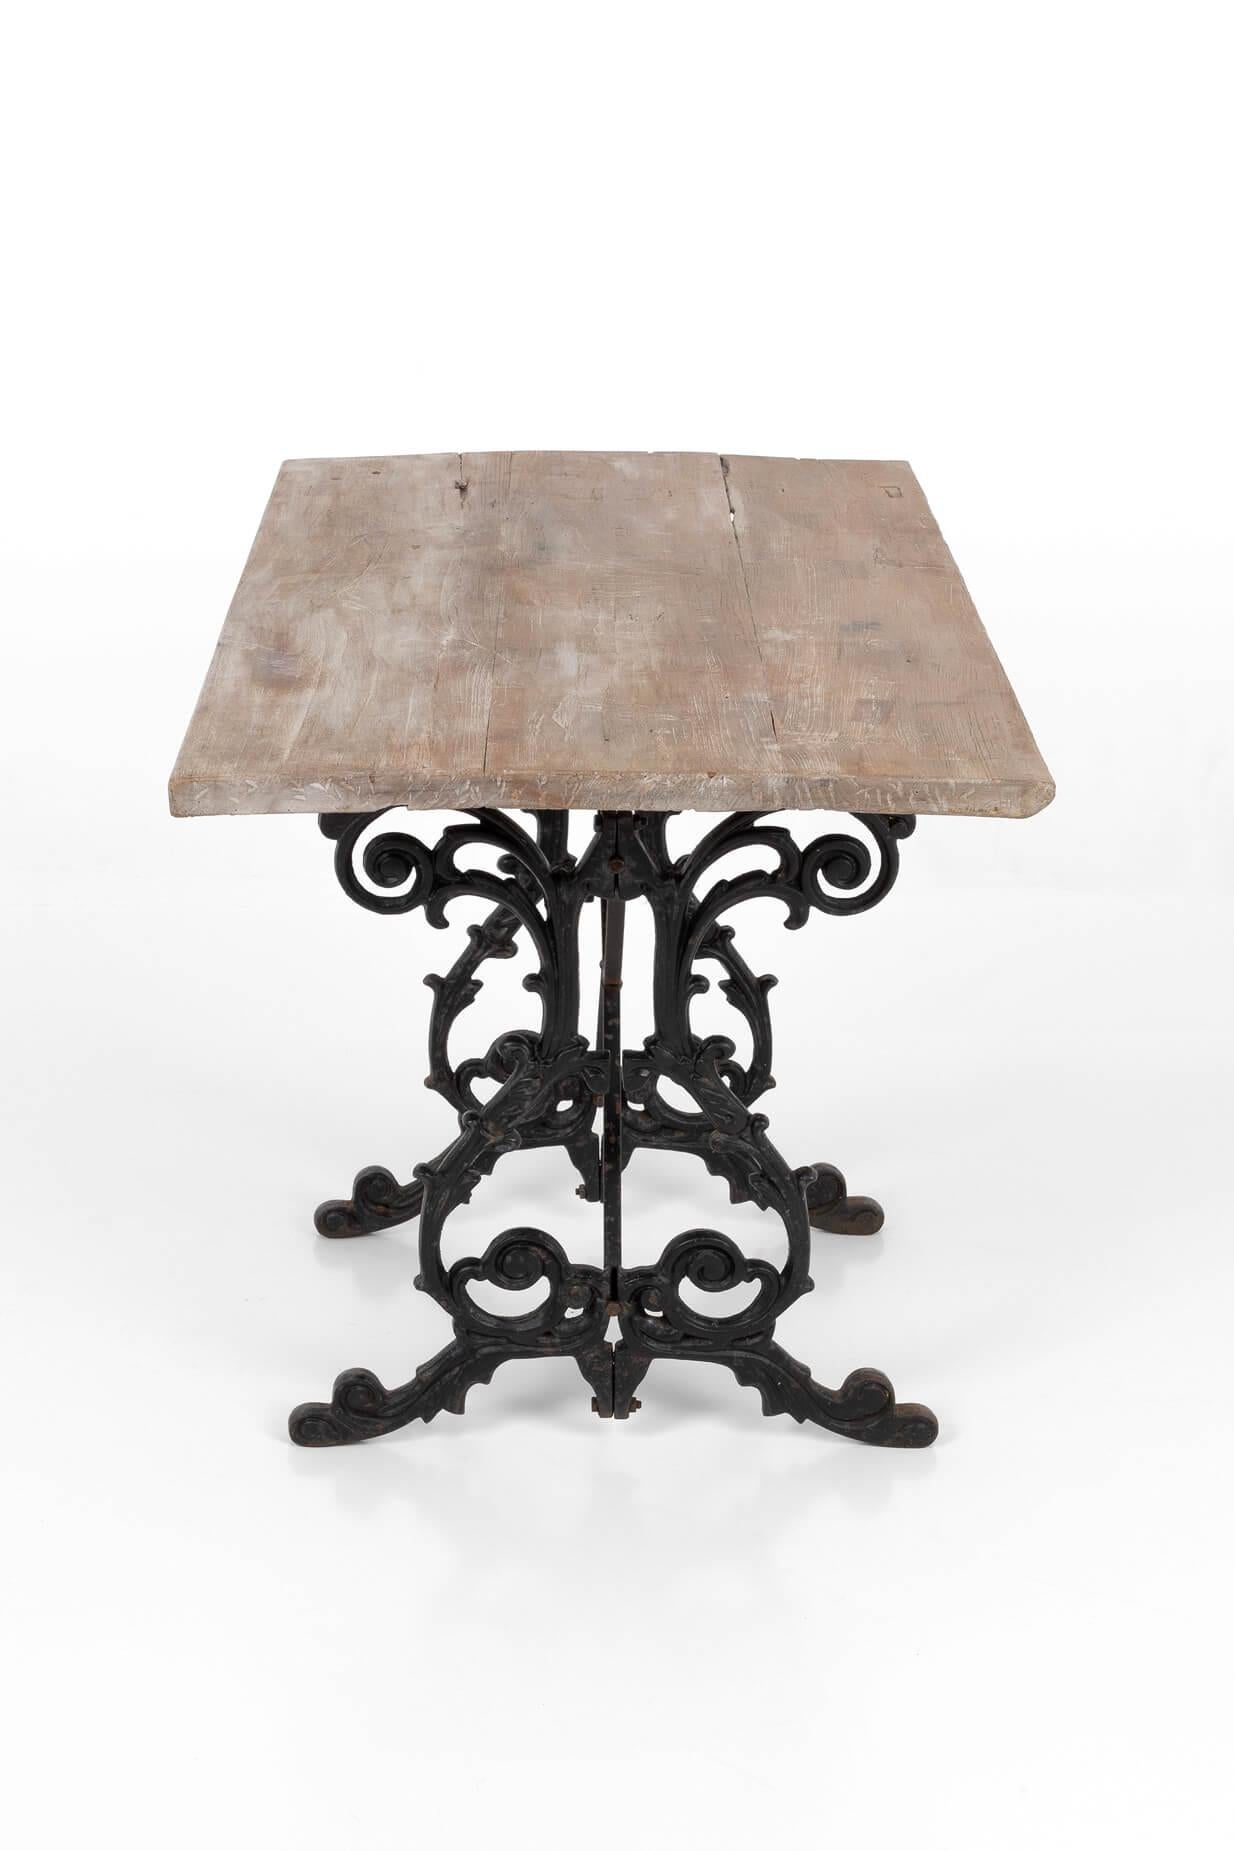 A Victorian hardwood garden table on a decorative cast iron base. Raised on splayed feet and united by a cross stretcher.
English, circa 1890.

Additional Information:
H 74 cm (H 29.1 inches)
W 65 cm (W 25.5 inches)
D 80 cm (D 31.4 inches).